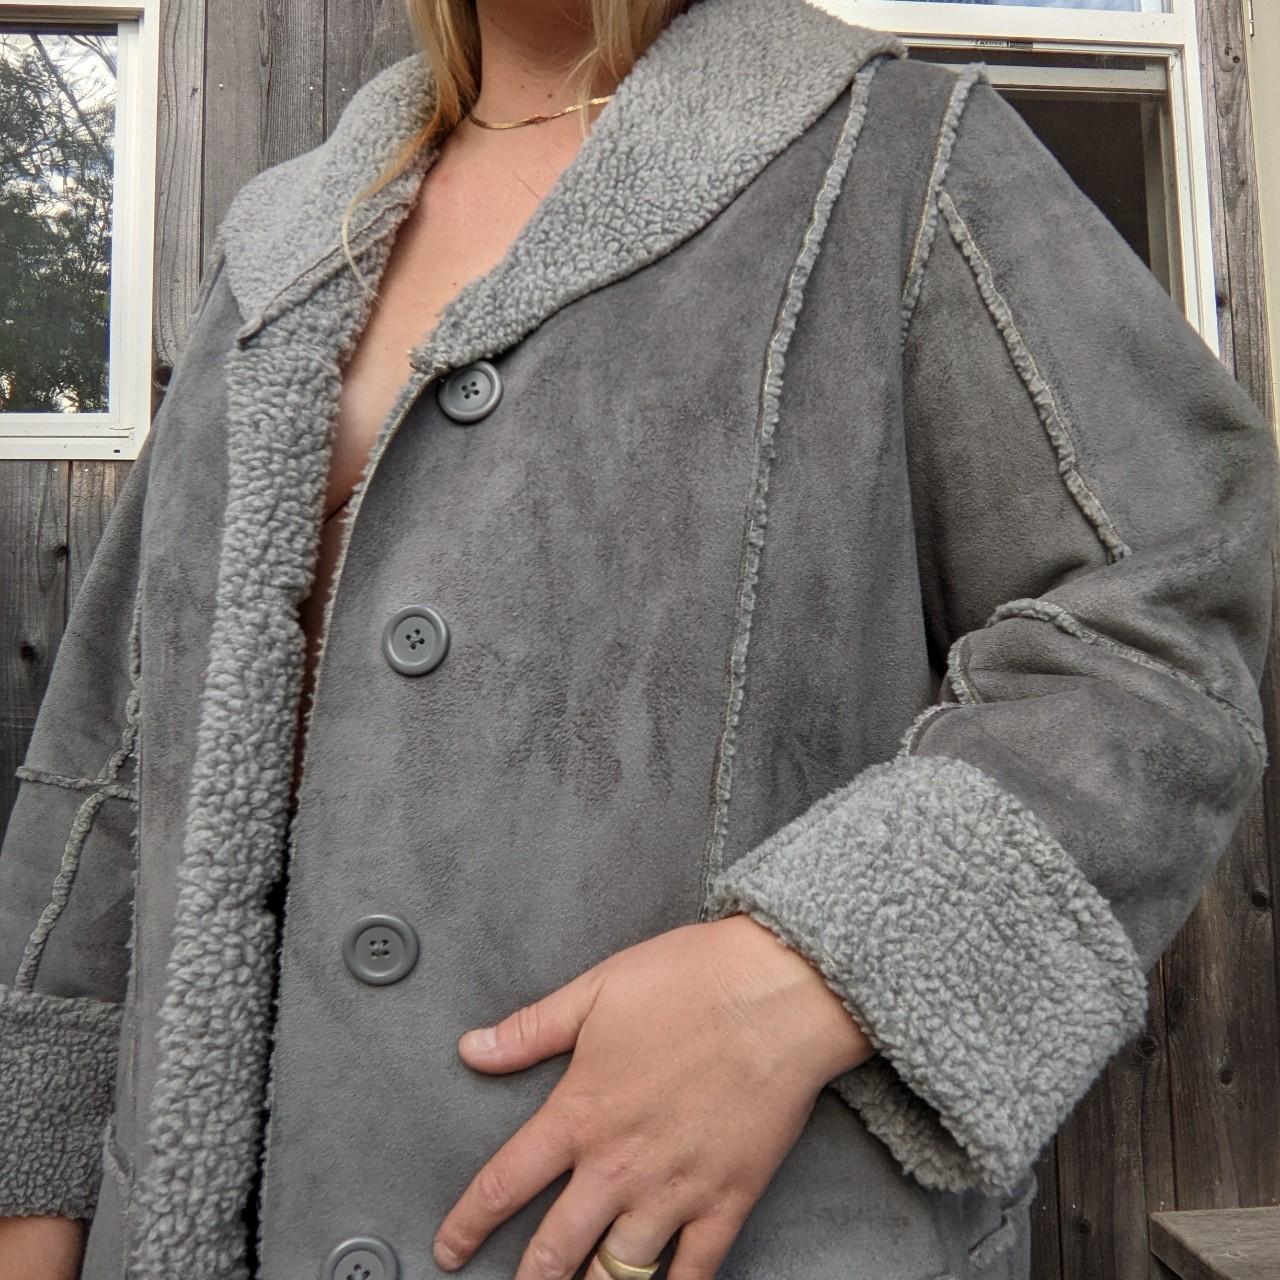 Product Image 2 - Penny Lane Coat

Brand is: Jessica